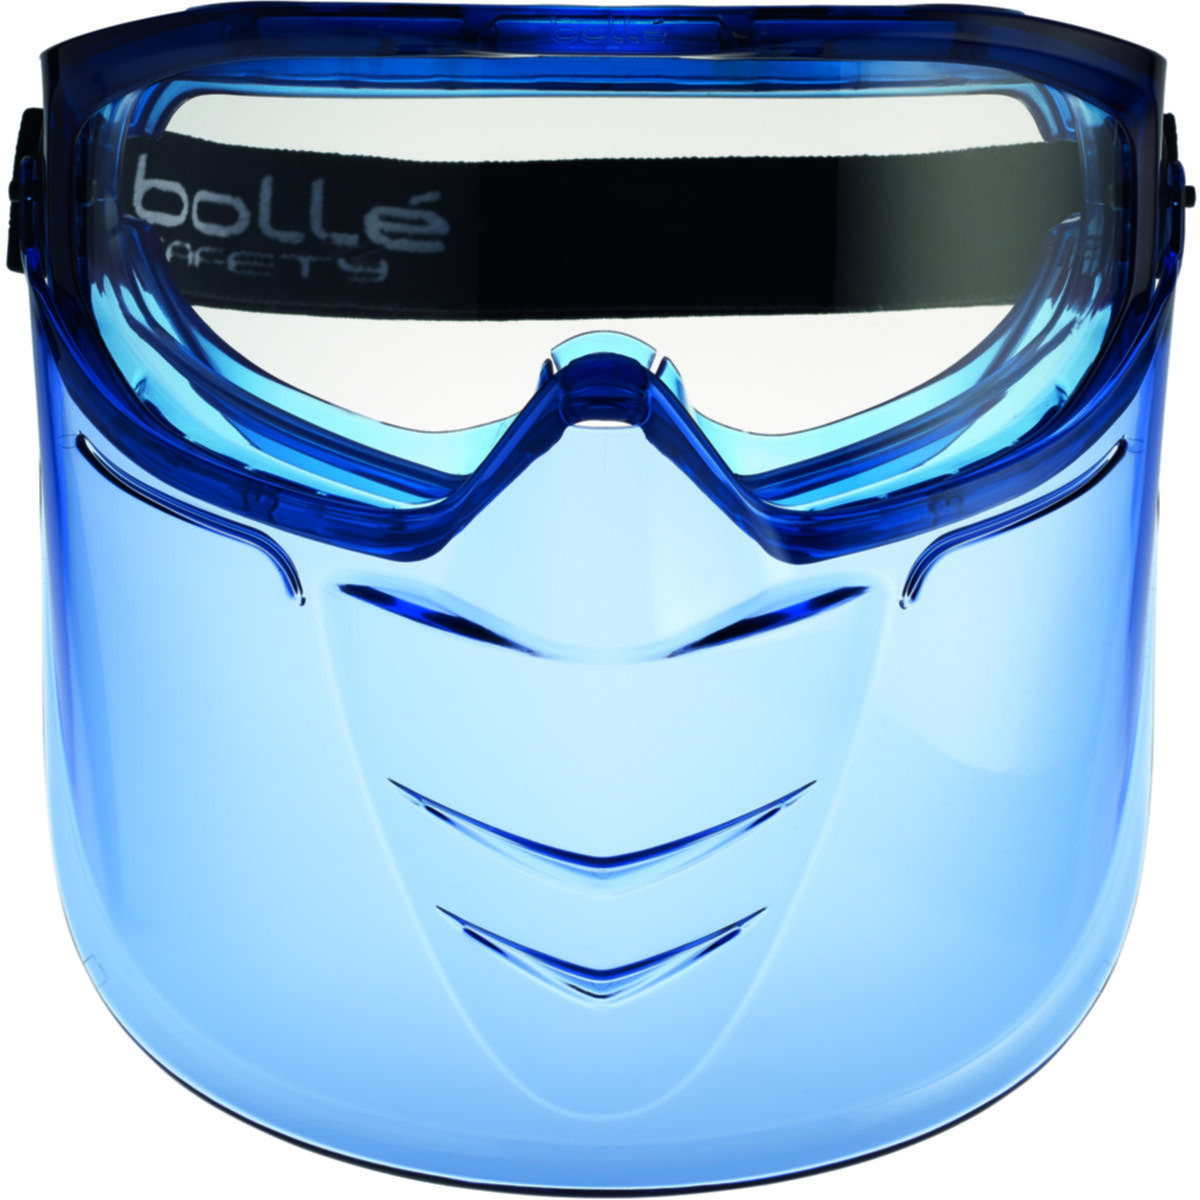 BOLLE SAFETY 40298 Visor,Blue,Polycarbonate,For Goggles 